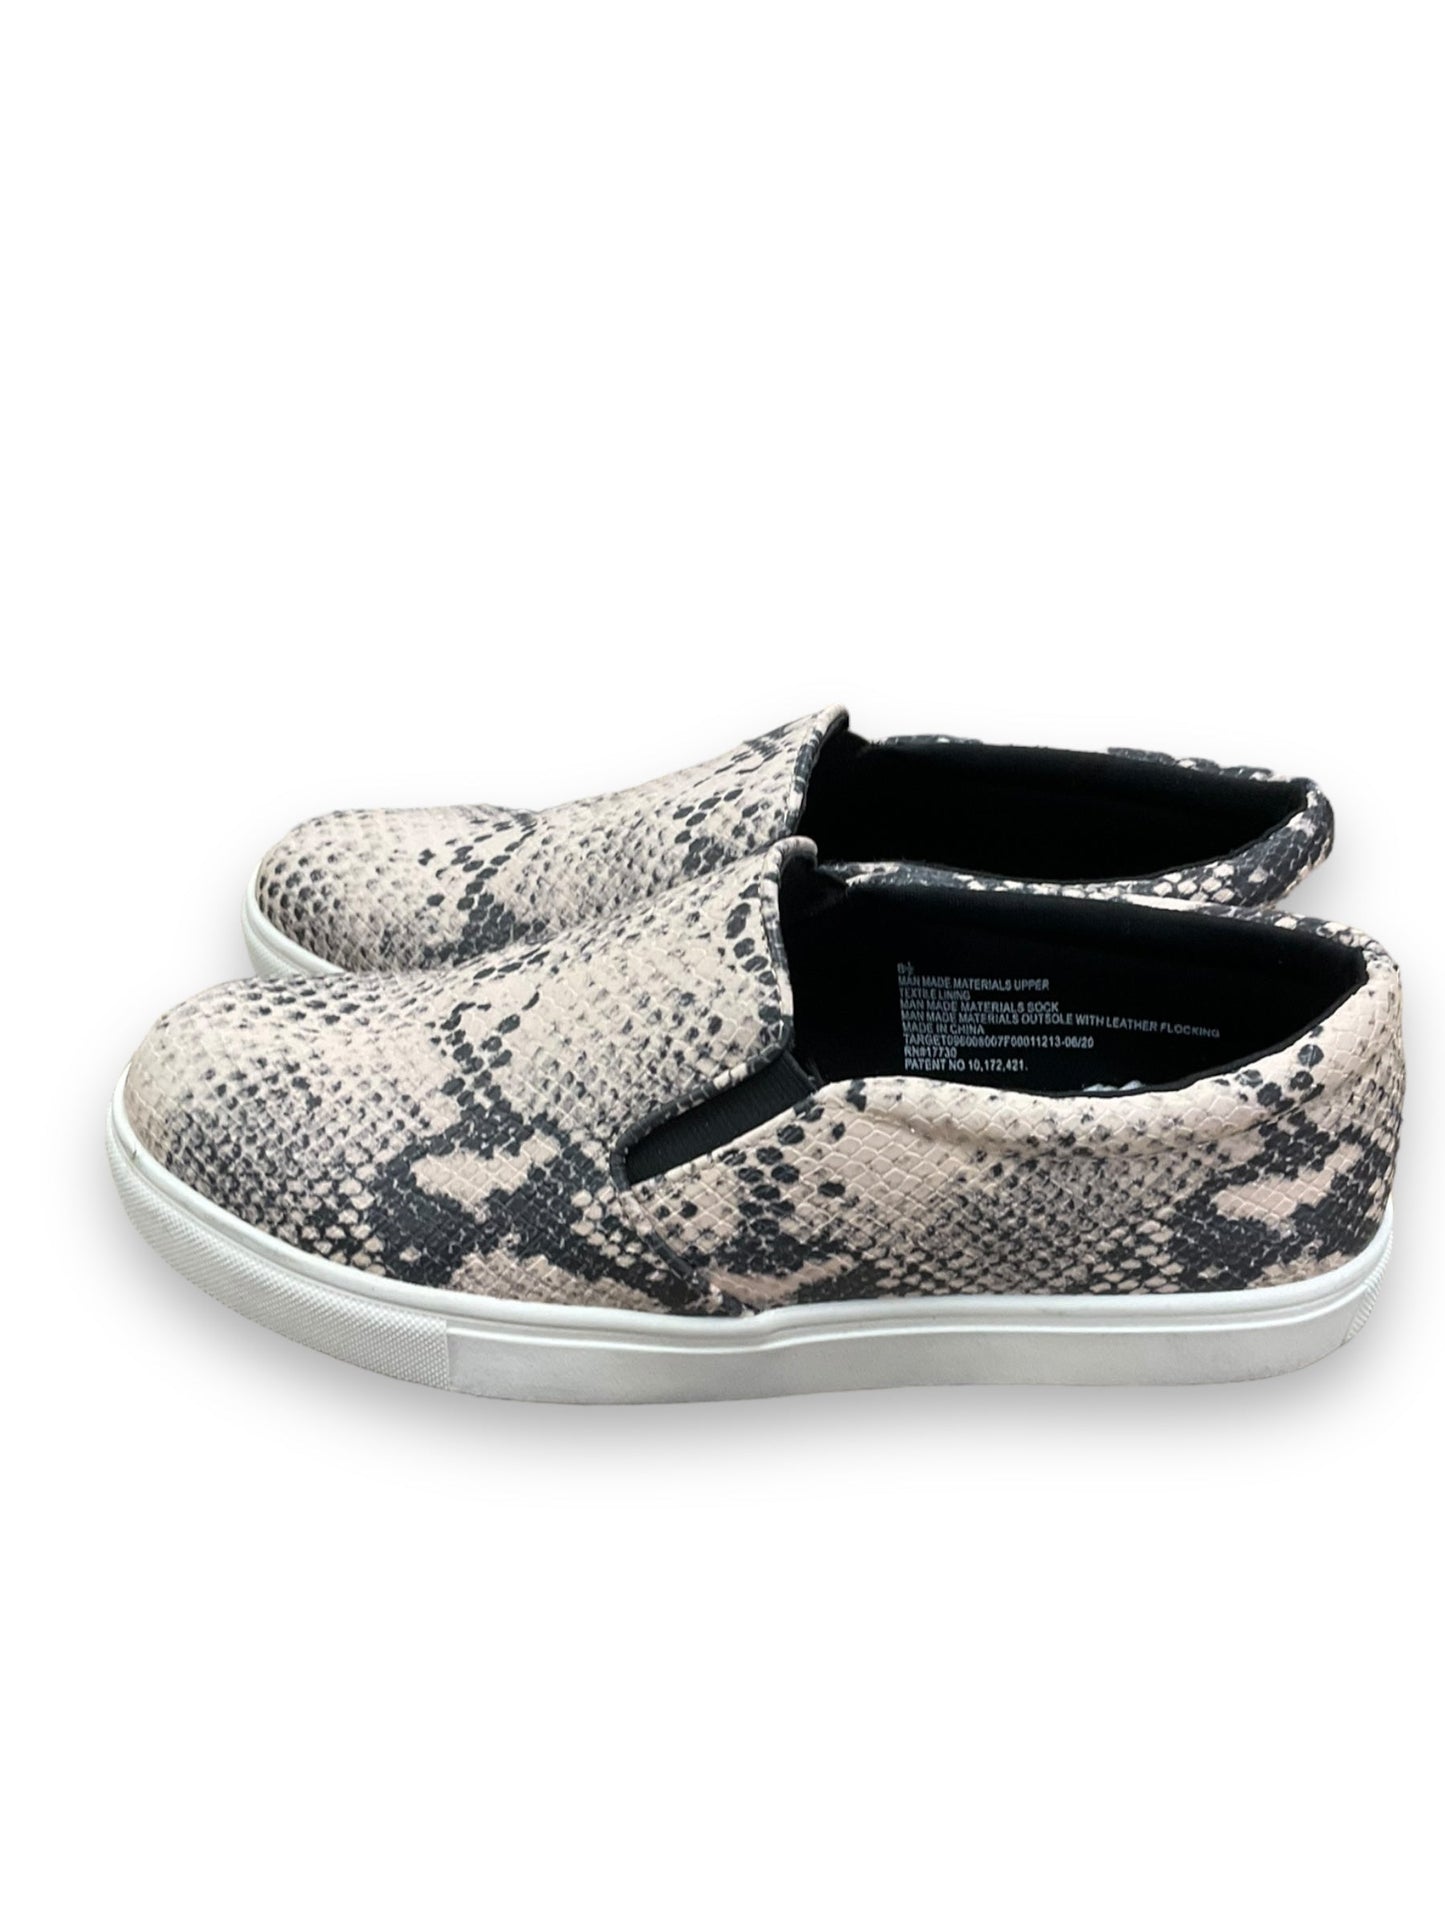 Shoes Sneakers By A New Day  Size: 8.5